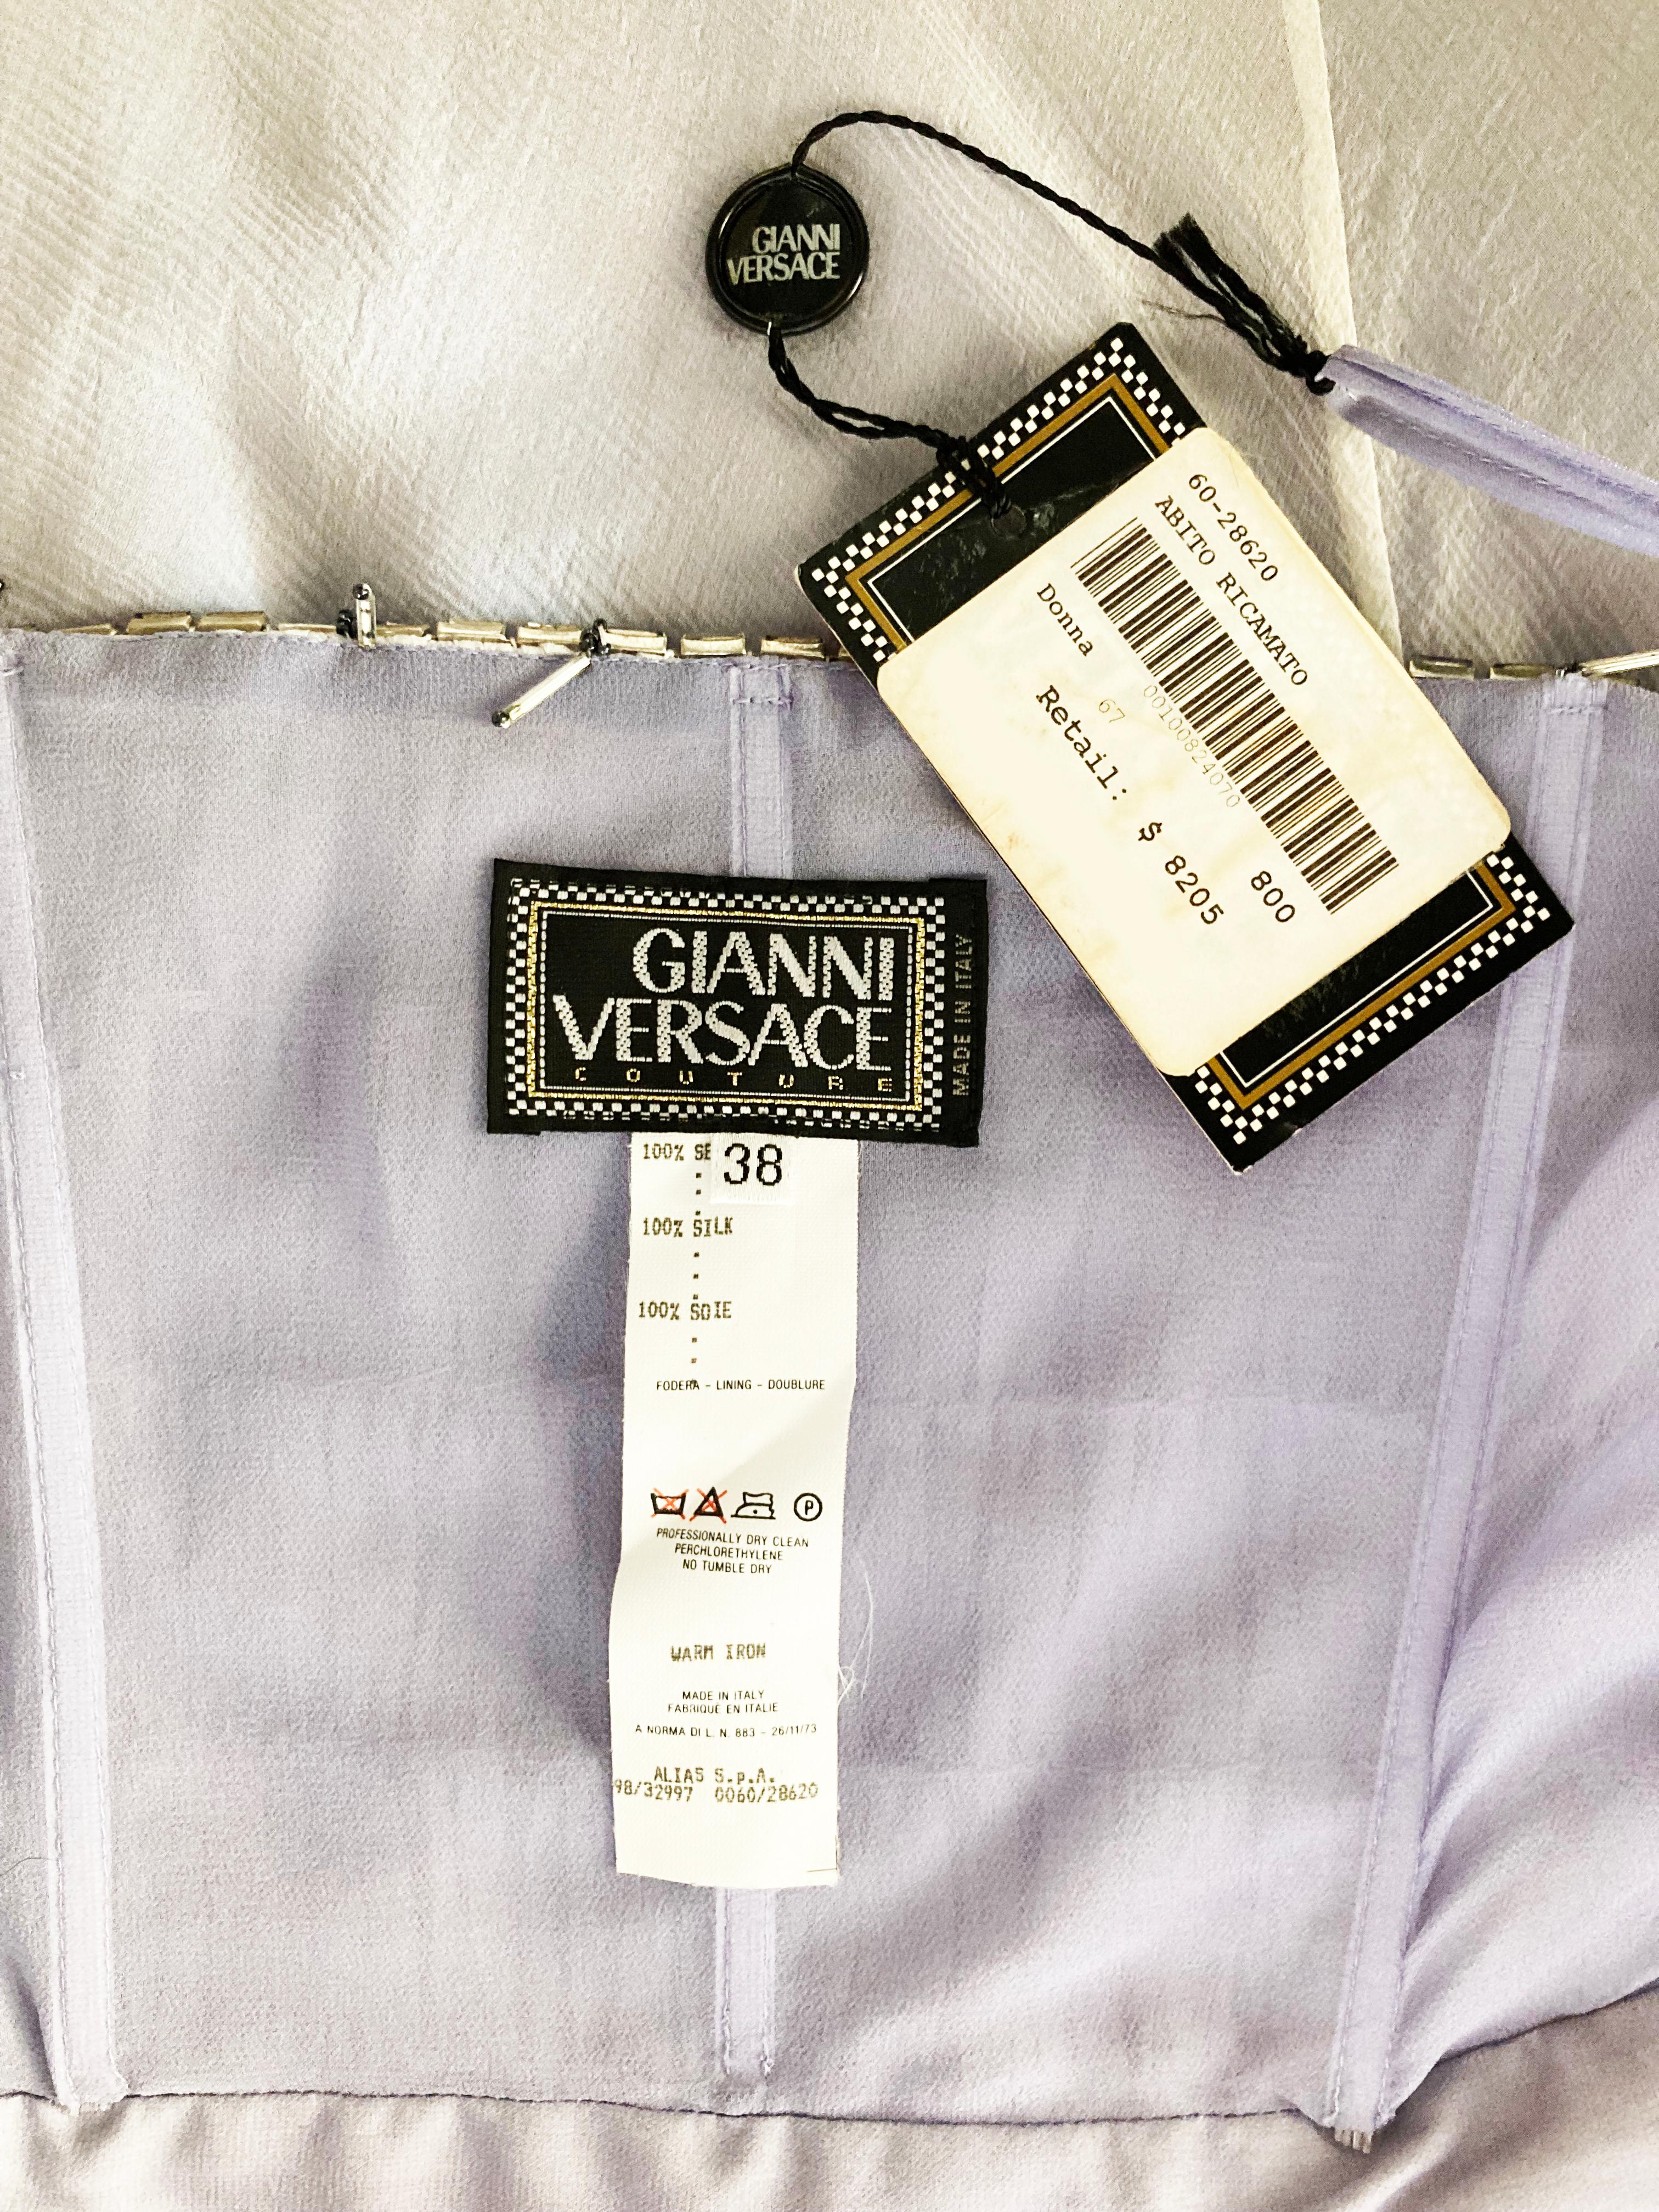 F/W 1998 VINTAGE GIANNI VERSACE COUTURE LILAC Dress 38 - 2 10